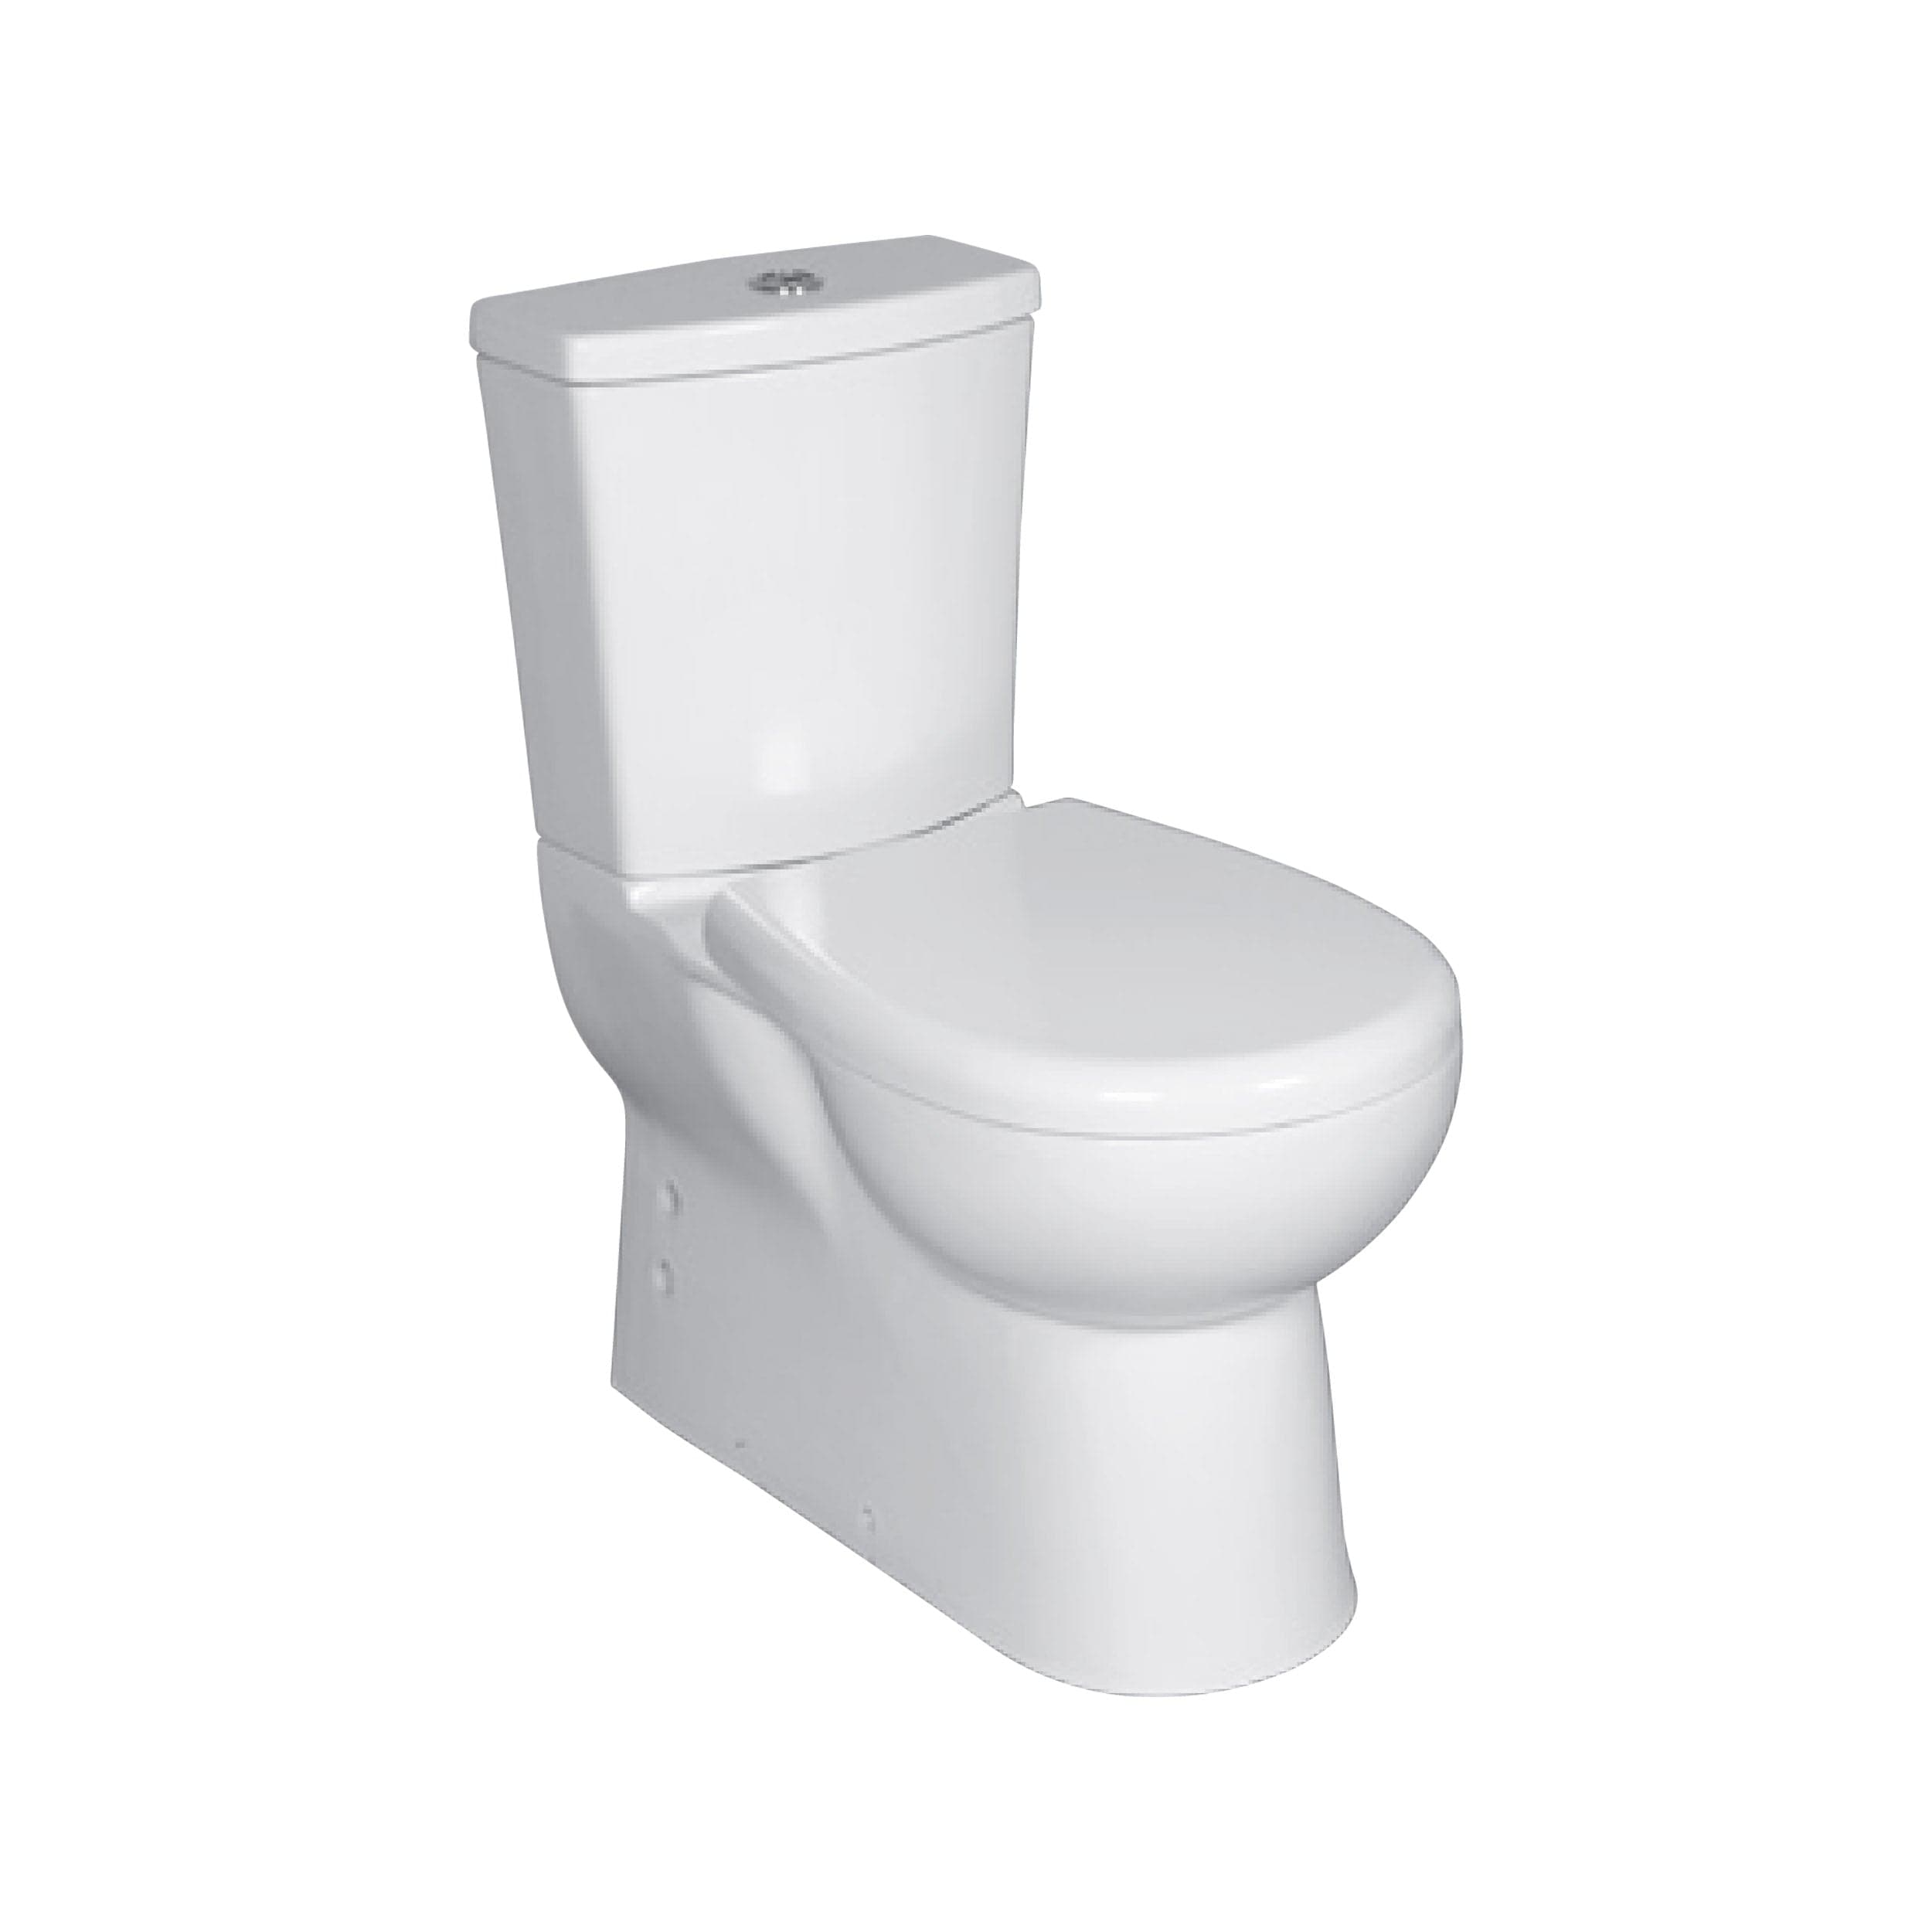 Ece Banyo Karizma Back to Wall Water Closet with Duroplast Soft Close & Cistern | Supply Master | Accra, Ghana Toilet & Urinal Buy Tools hardware Building materials